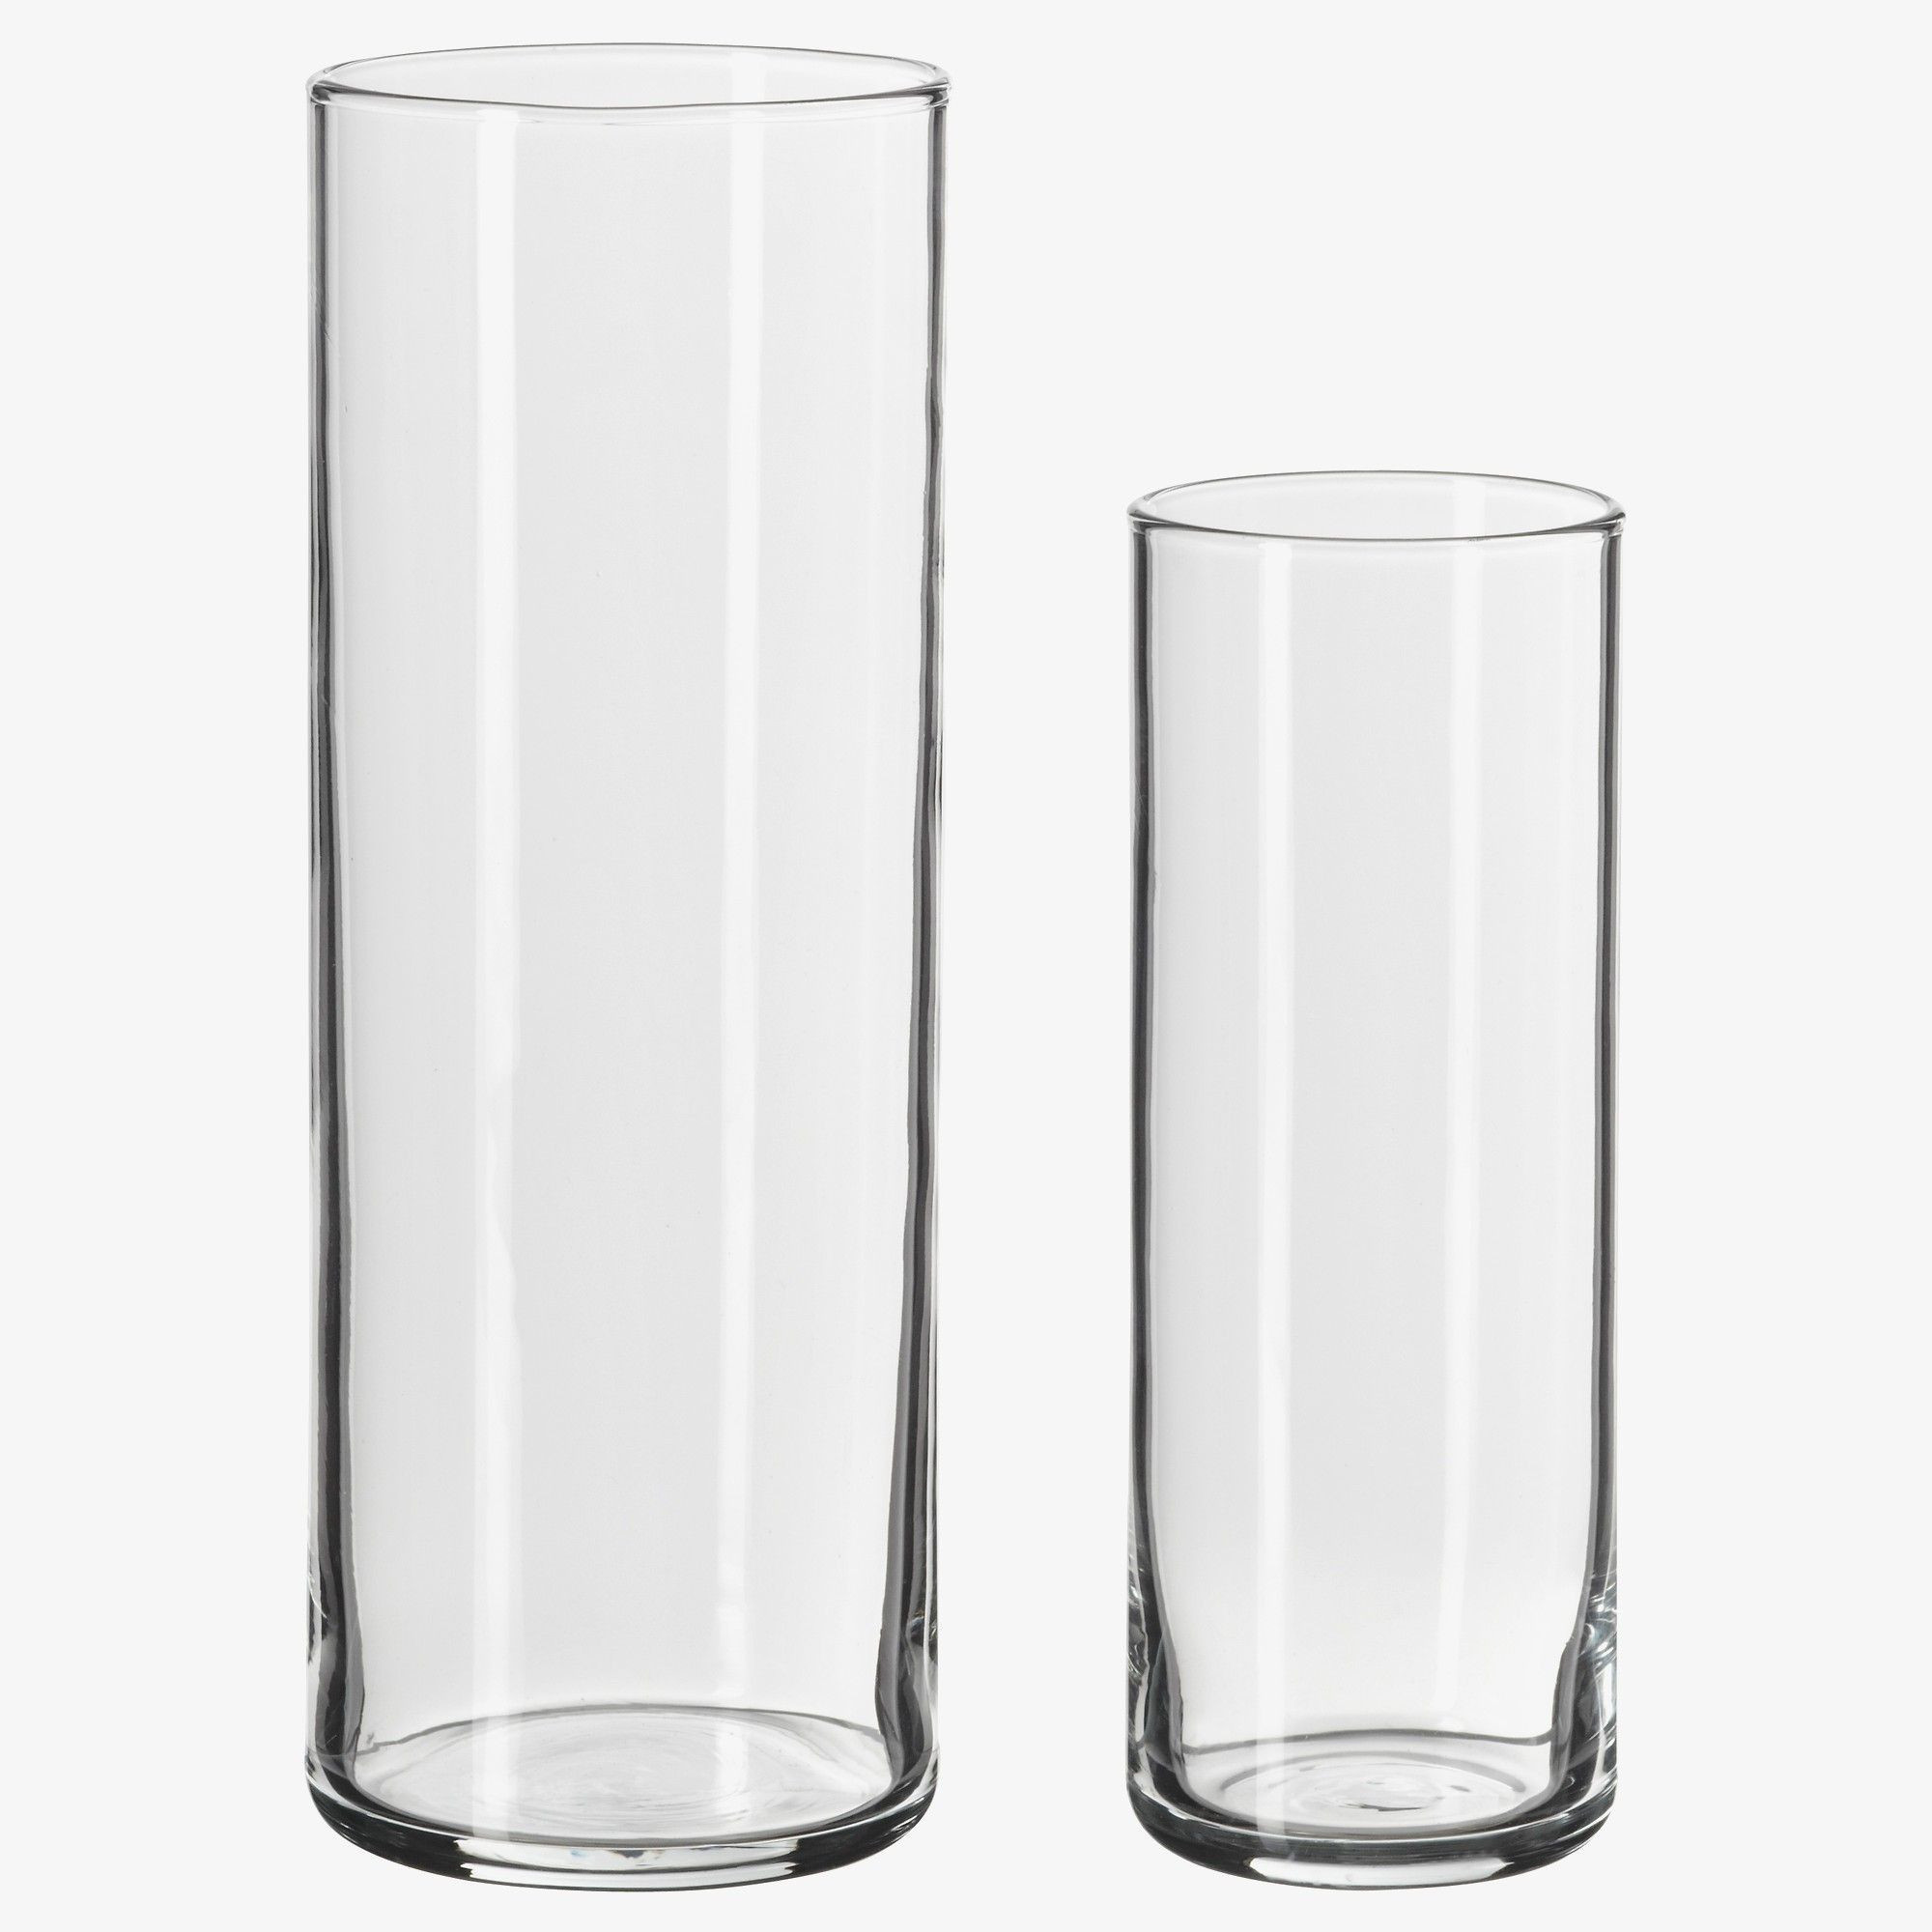 15 Awesome 5 X 20 Glass Cylinder Vase 2024 free download 5 x 20 glass cylinder vase of 50 glass pedestal vase the weekly world pertaining to clear glass tv stand charming new design ikea mantel great pe s5h